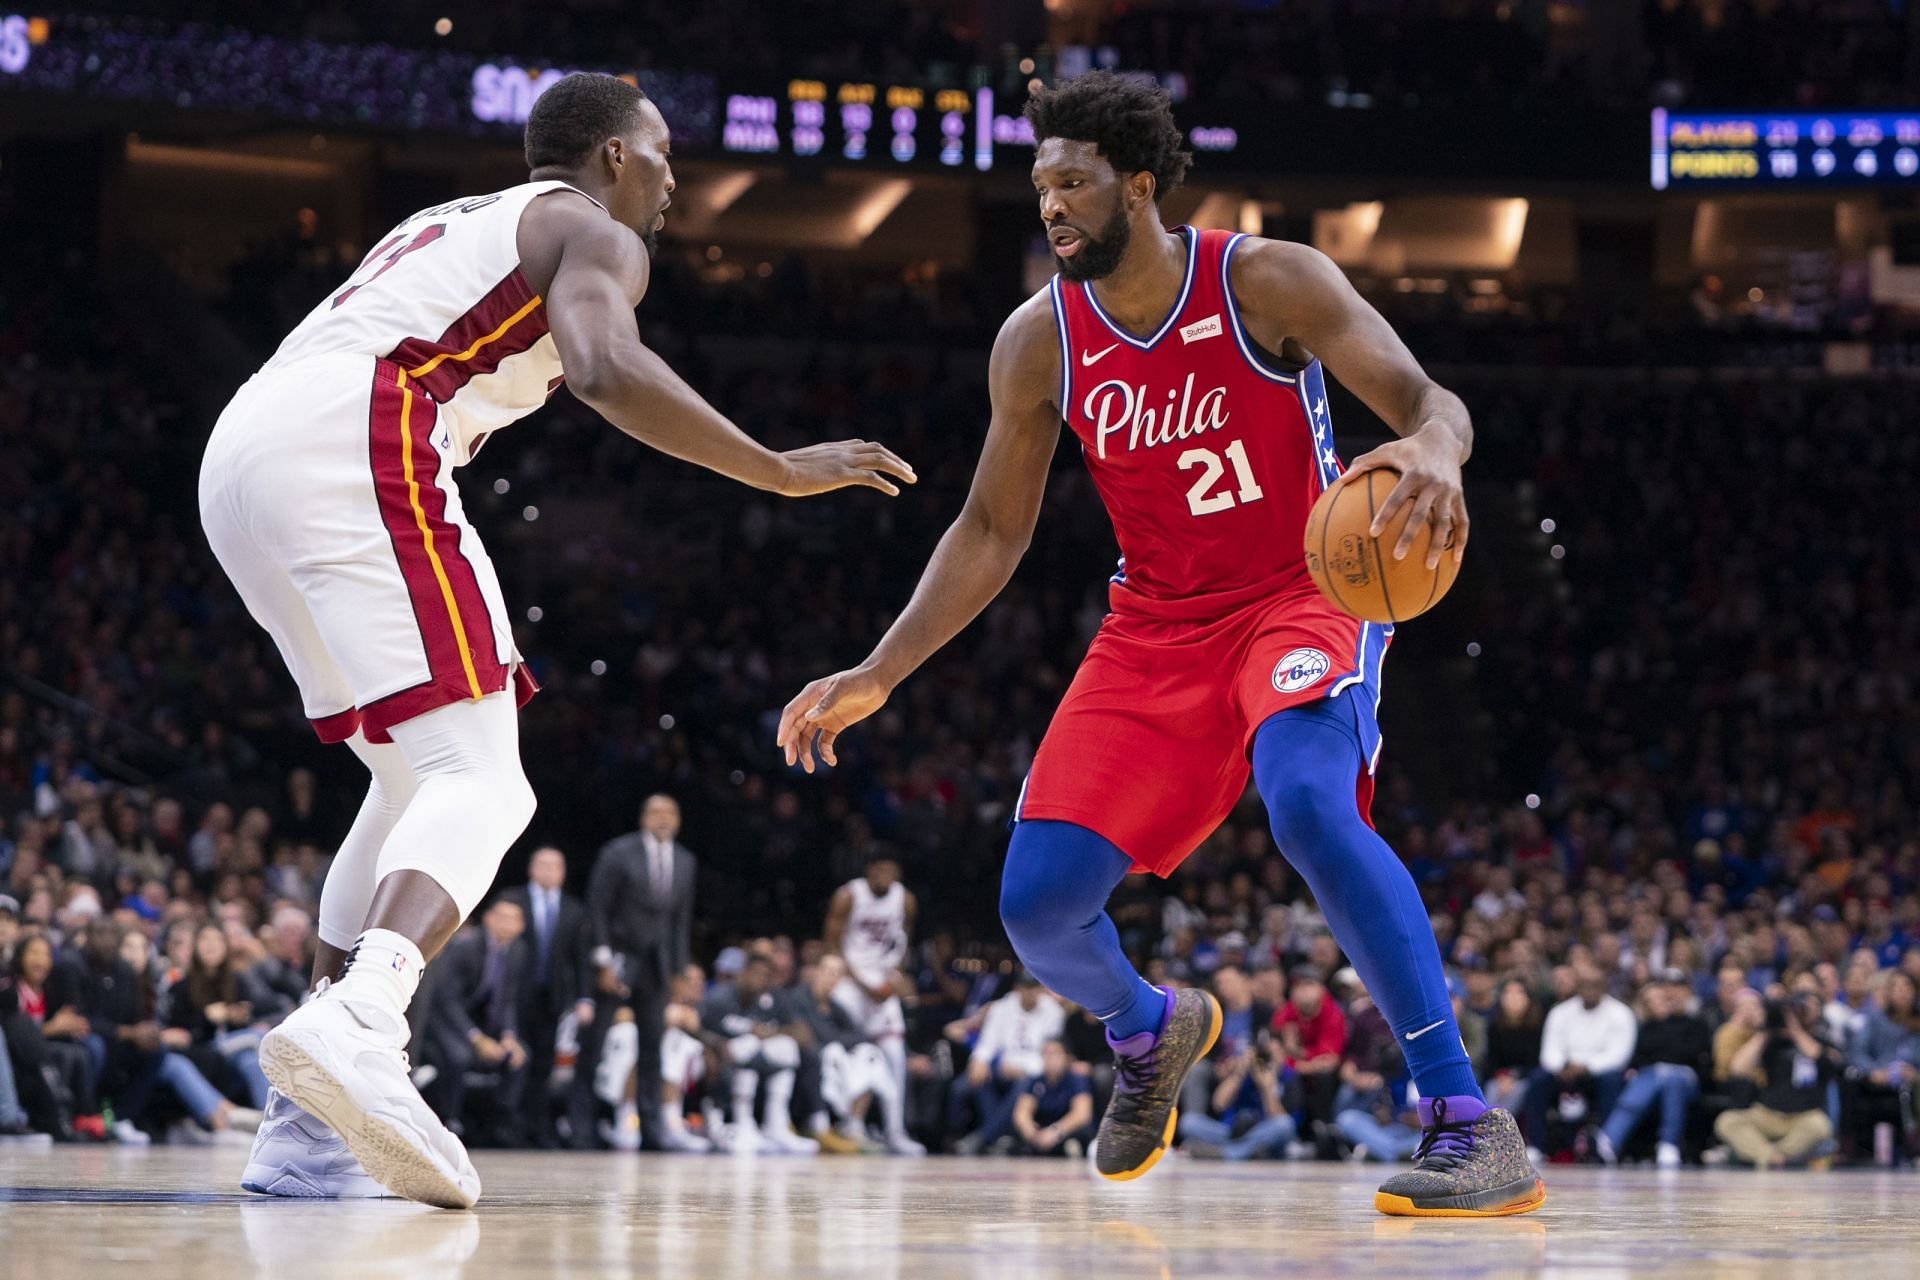 The Miami Heat and the Philadelphia 76ers are both dealing with injuries heading into their matchup on Wednesday. [Photo: All U Can Heat]